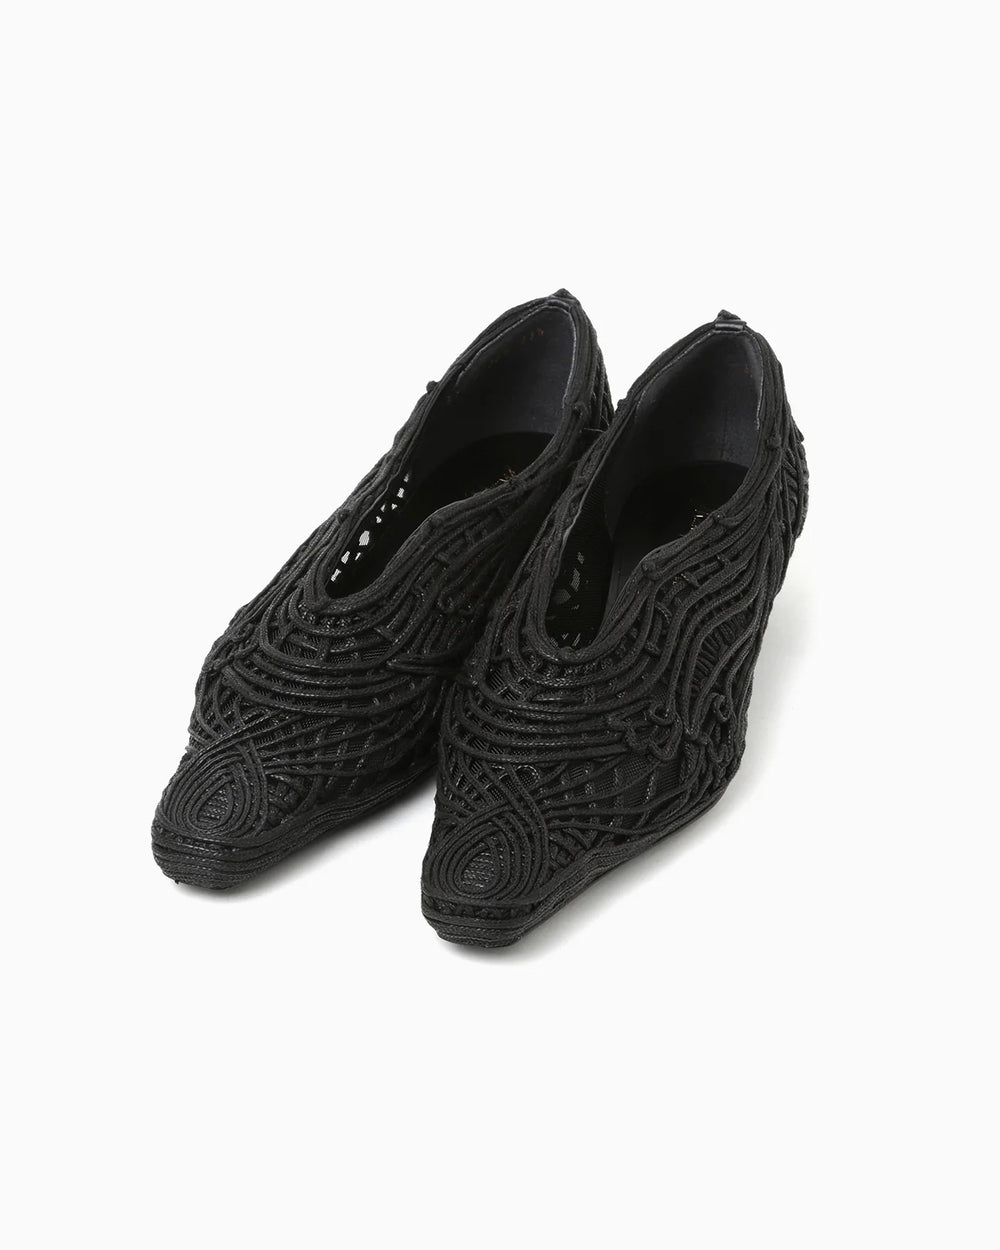 Cord Embroidery Egg Heel Pumps235cm